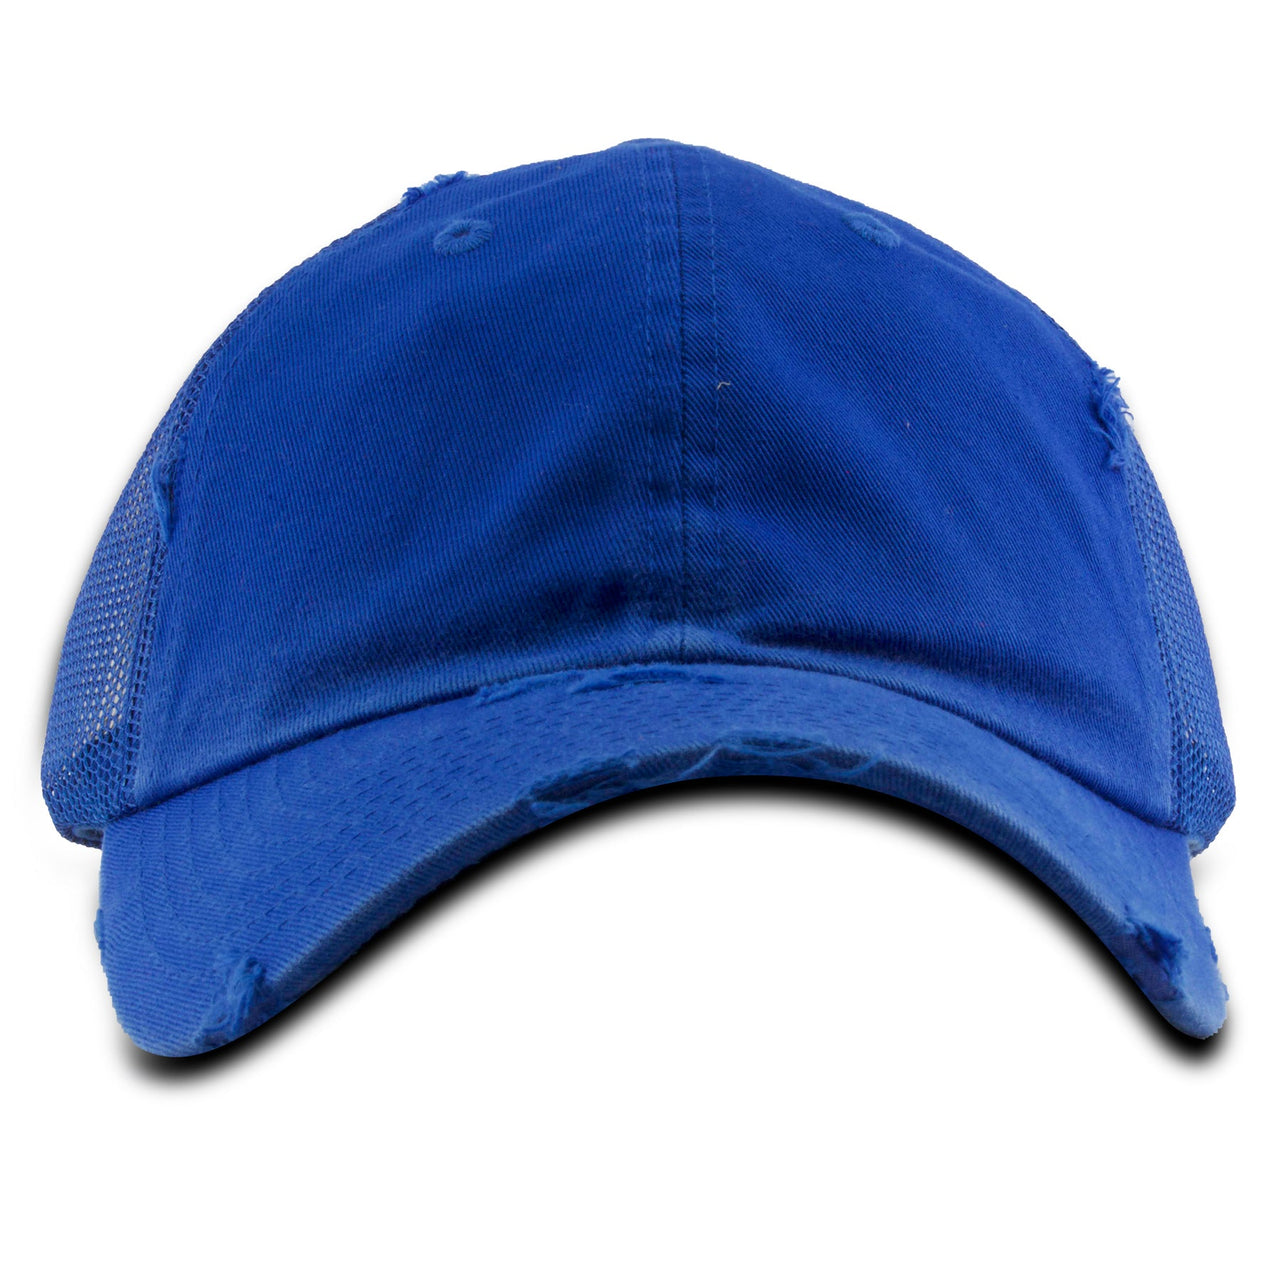 The blue mesh-back distressed blank snapback dad hat hat an unstructured crown and a bent brim